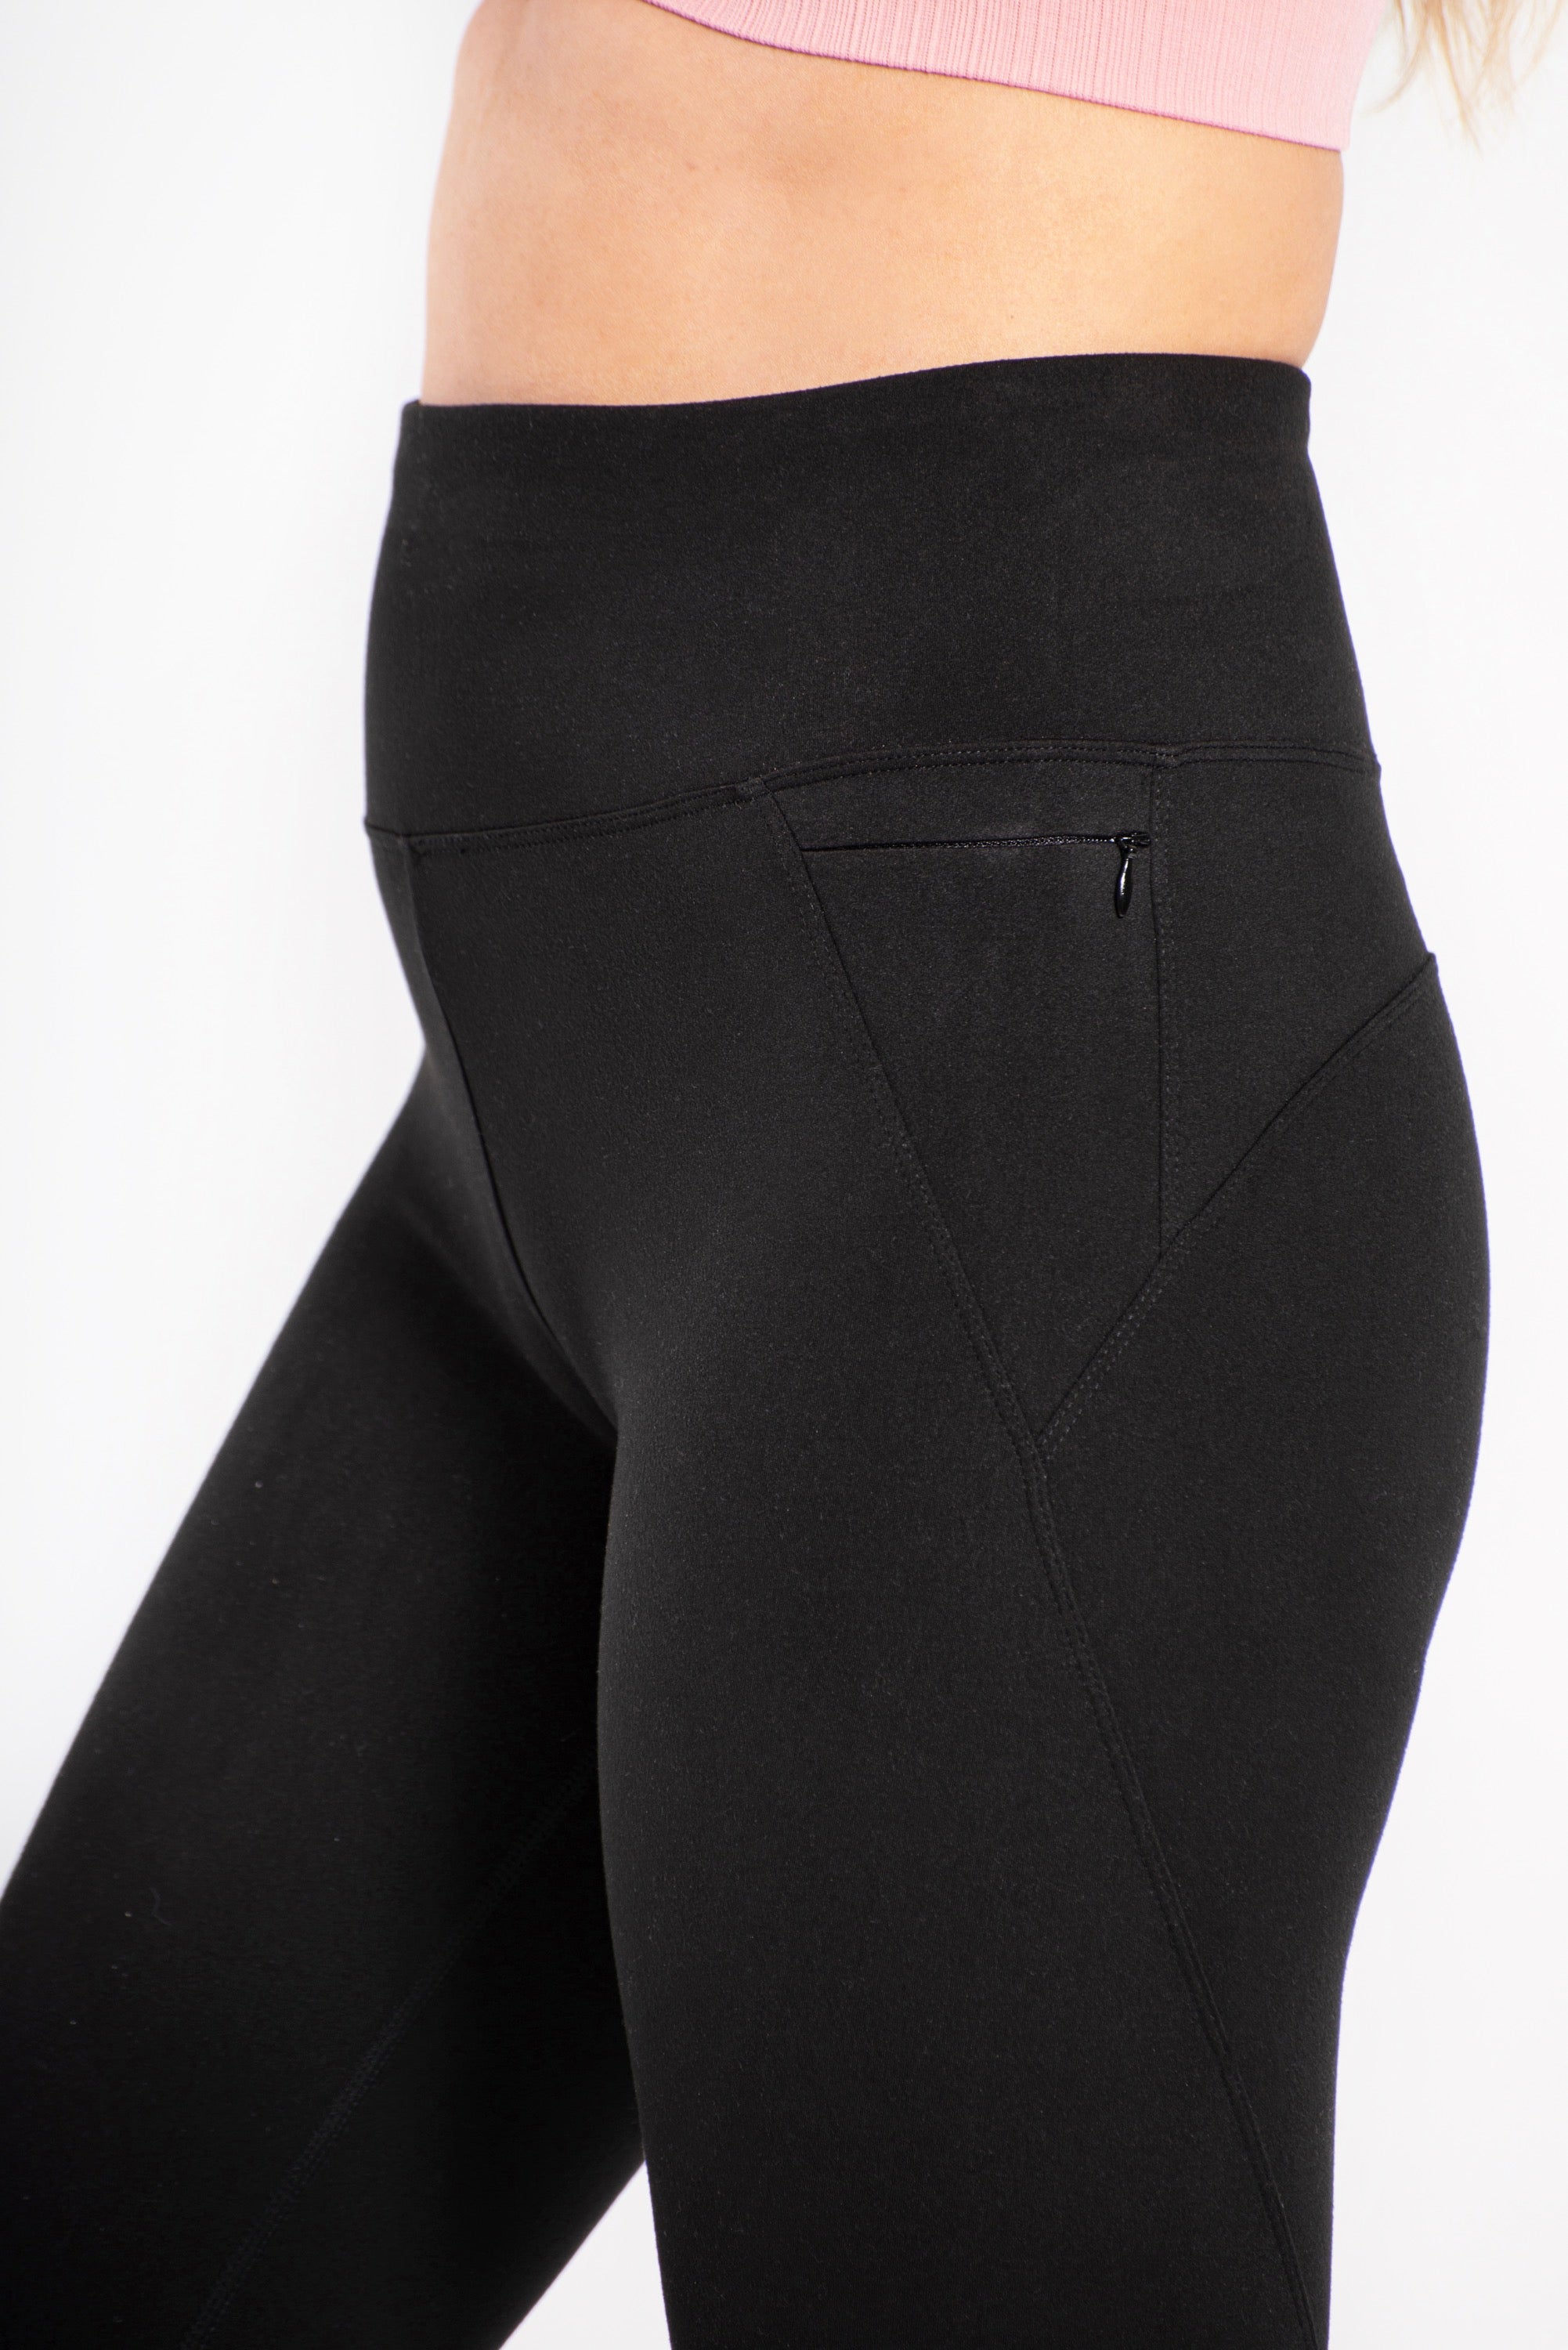 Lux Lyra Ankle Length Leggings at Rs 220 | Sion | Mumbai | ID: 21476021062